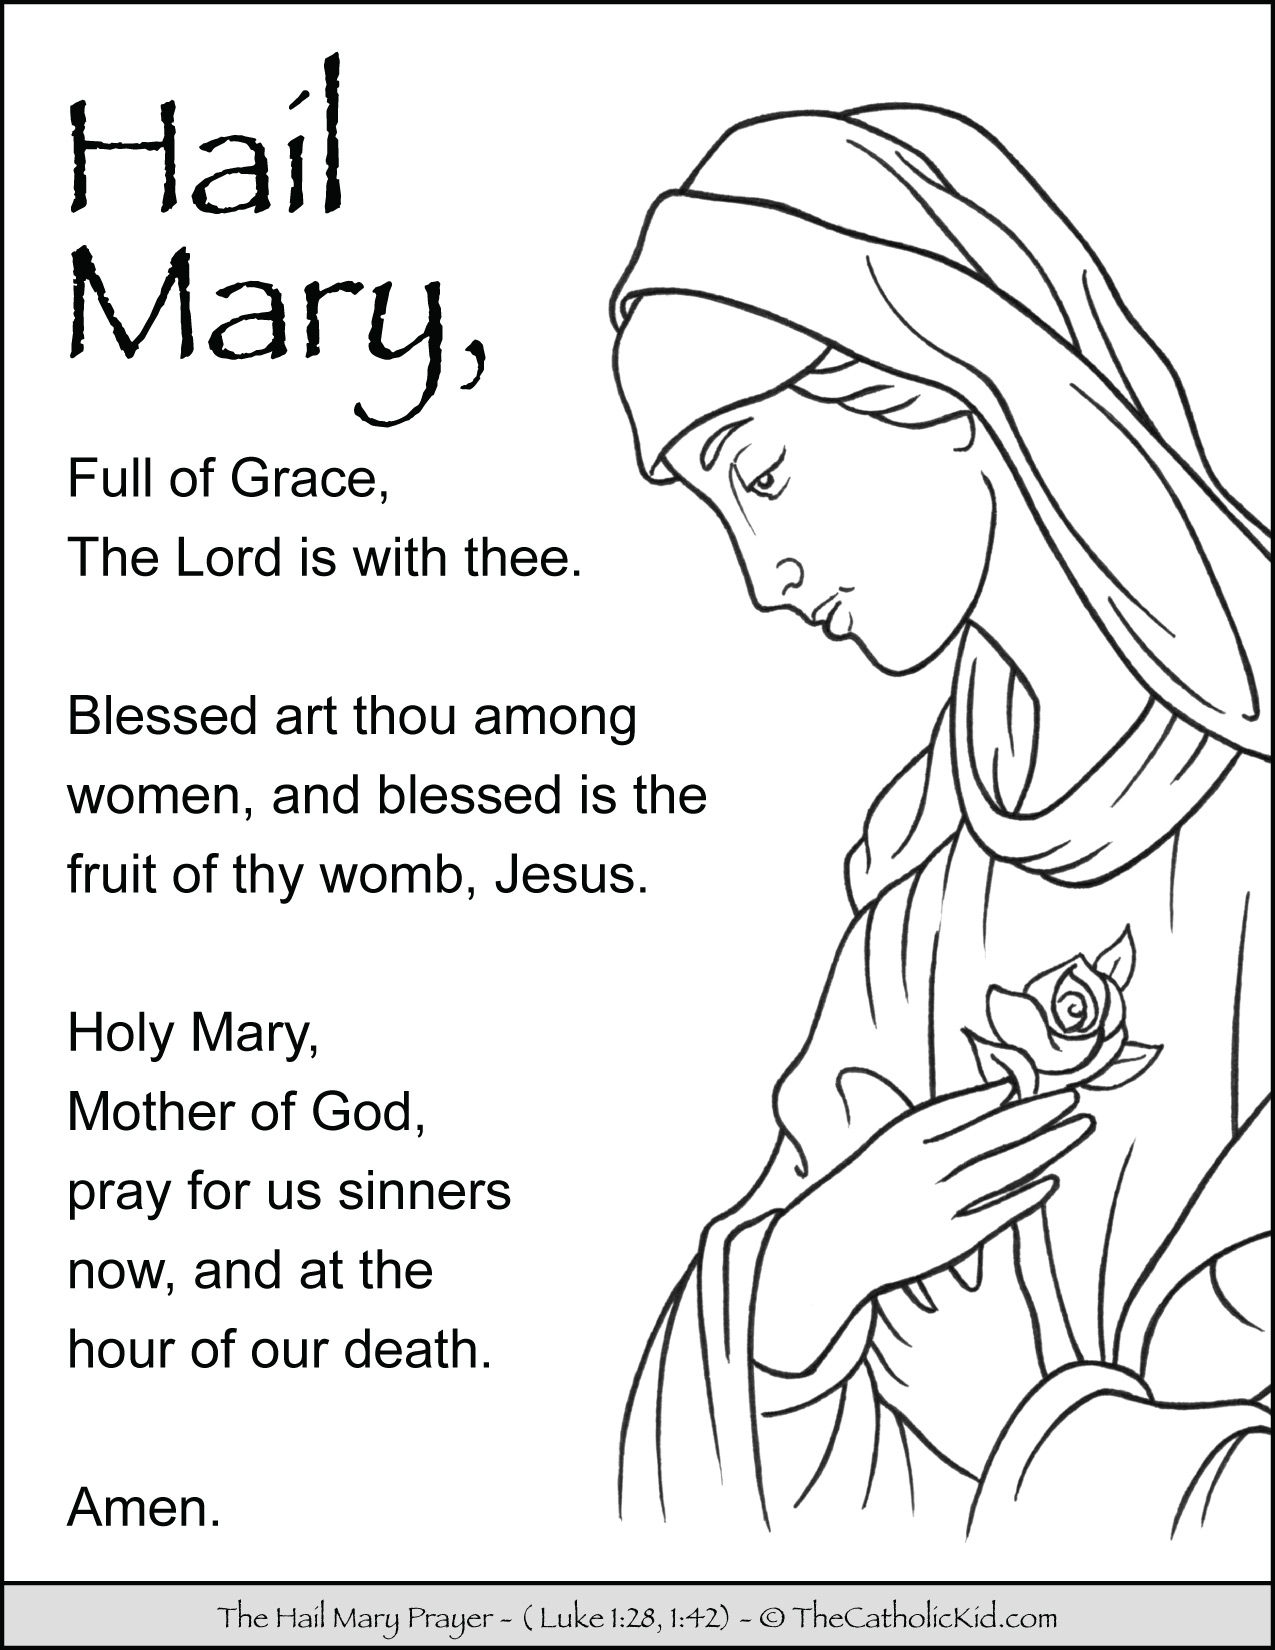 Hail Mary Prayer Coloring Page 2 - TheCatholicKid.com